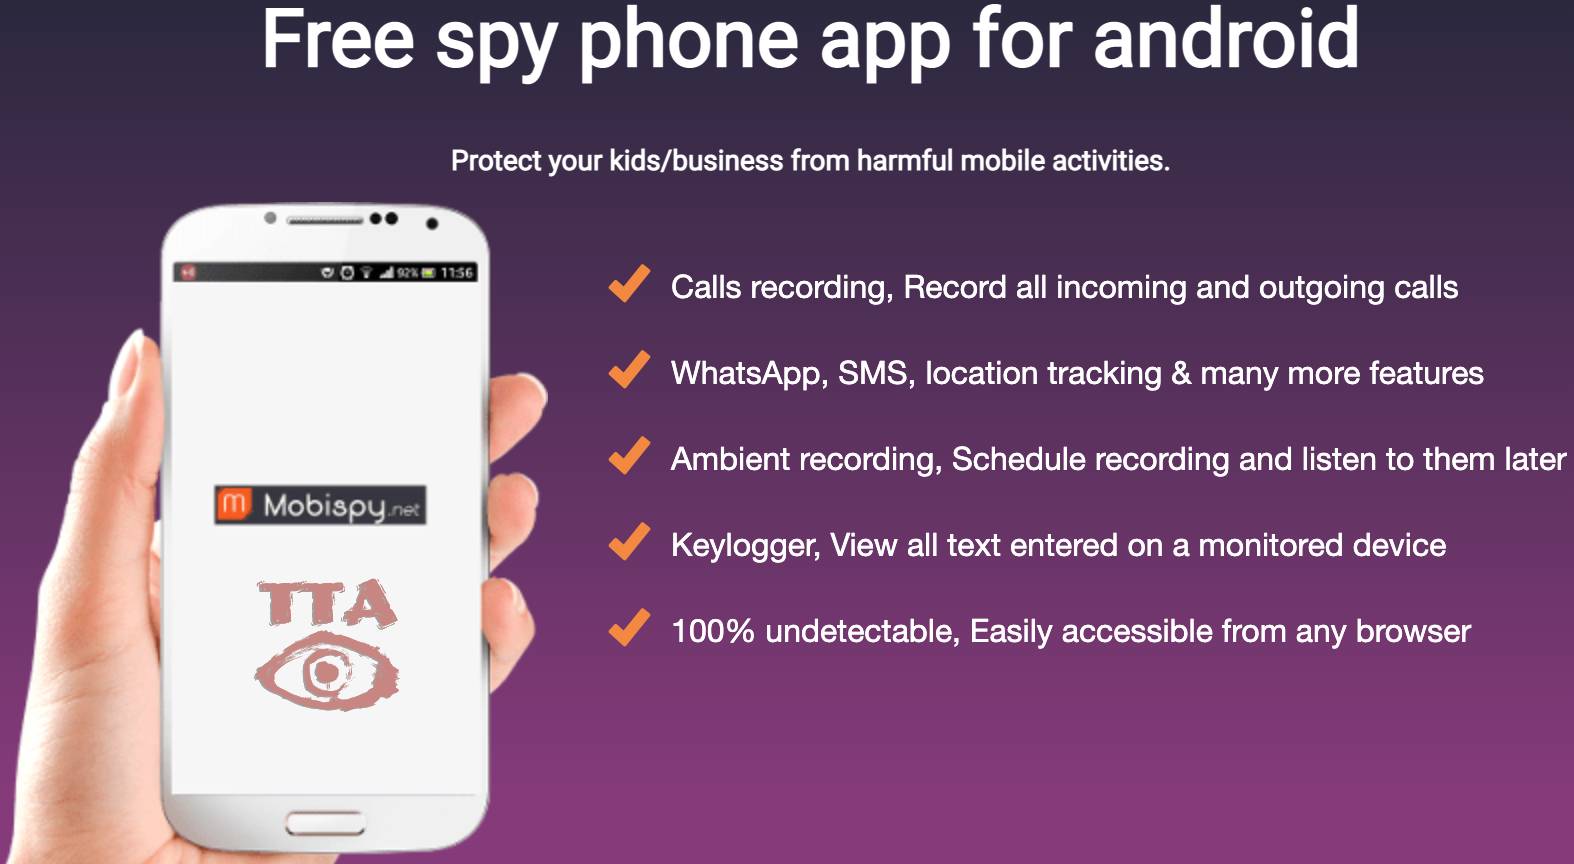 MobiSpy App Review: The Best Value Phone Spy Software?